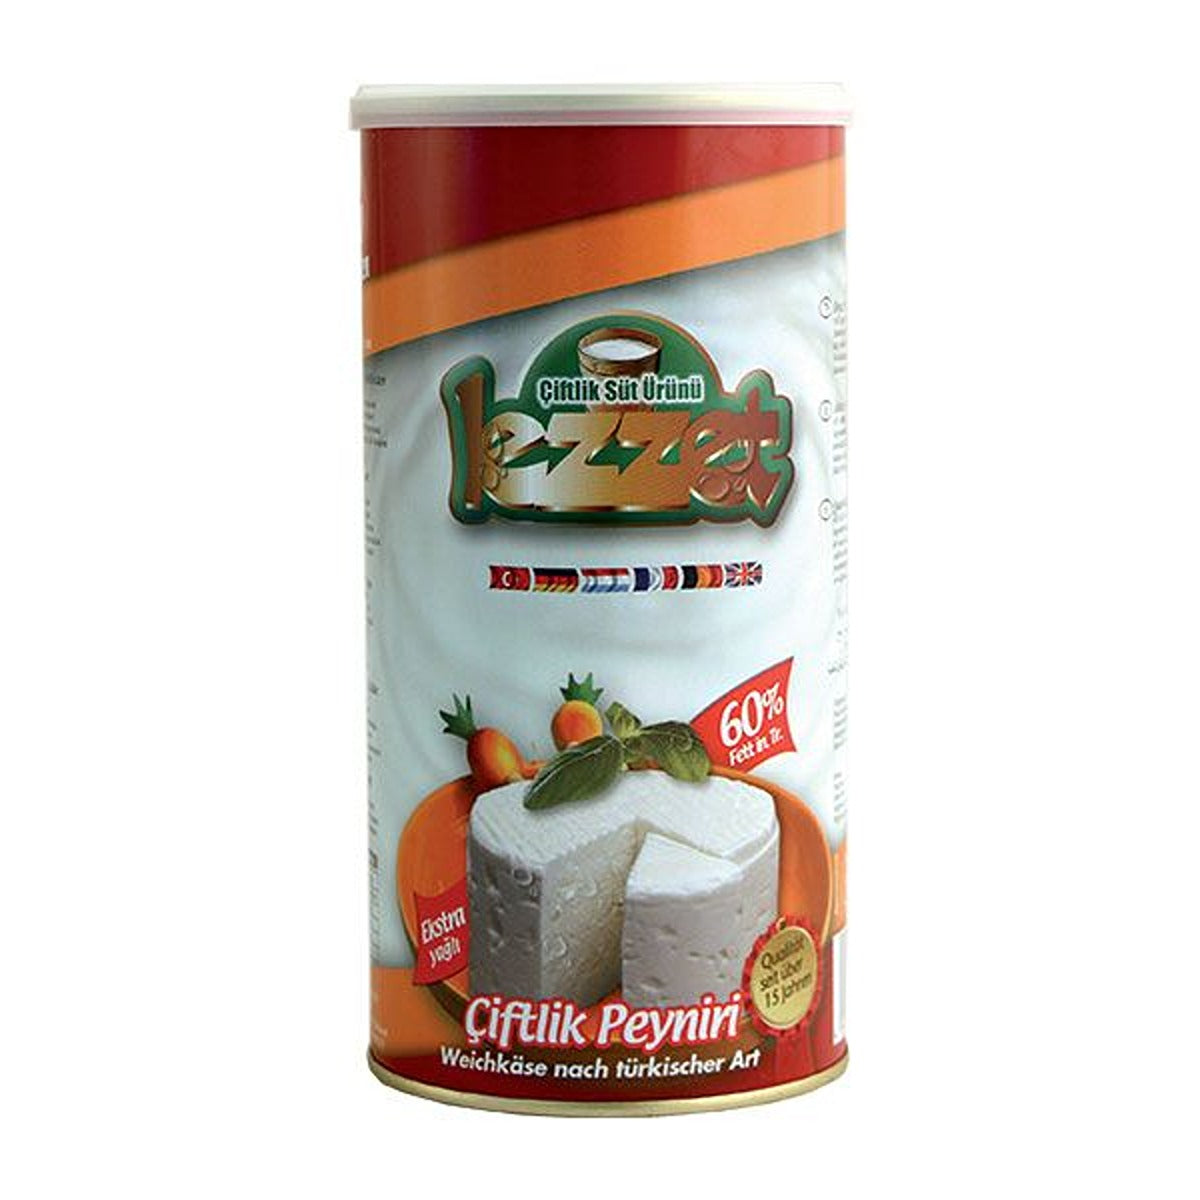 Lezzet - 60% Fat Cow Cheese - 800g - Continental Food Store